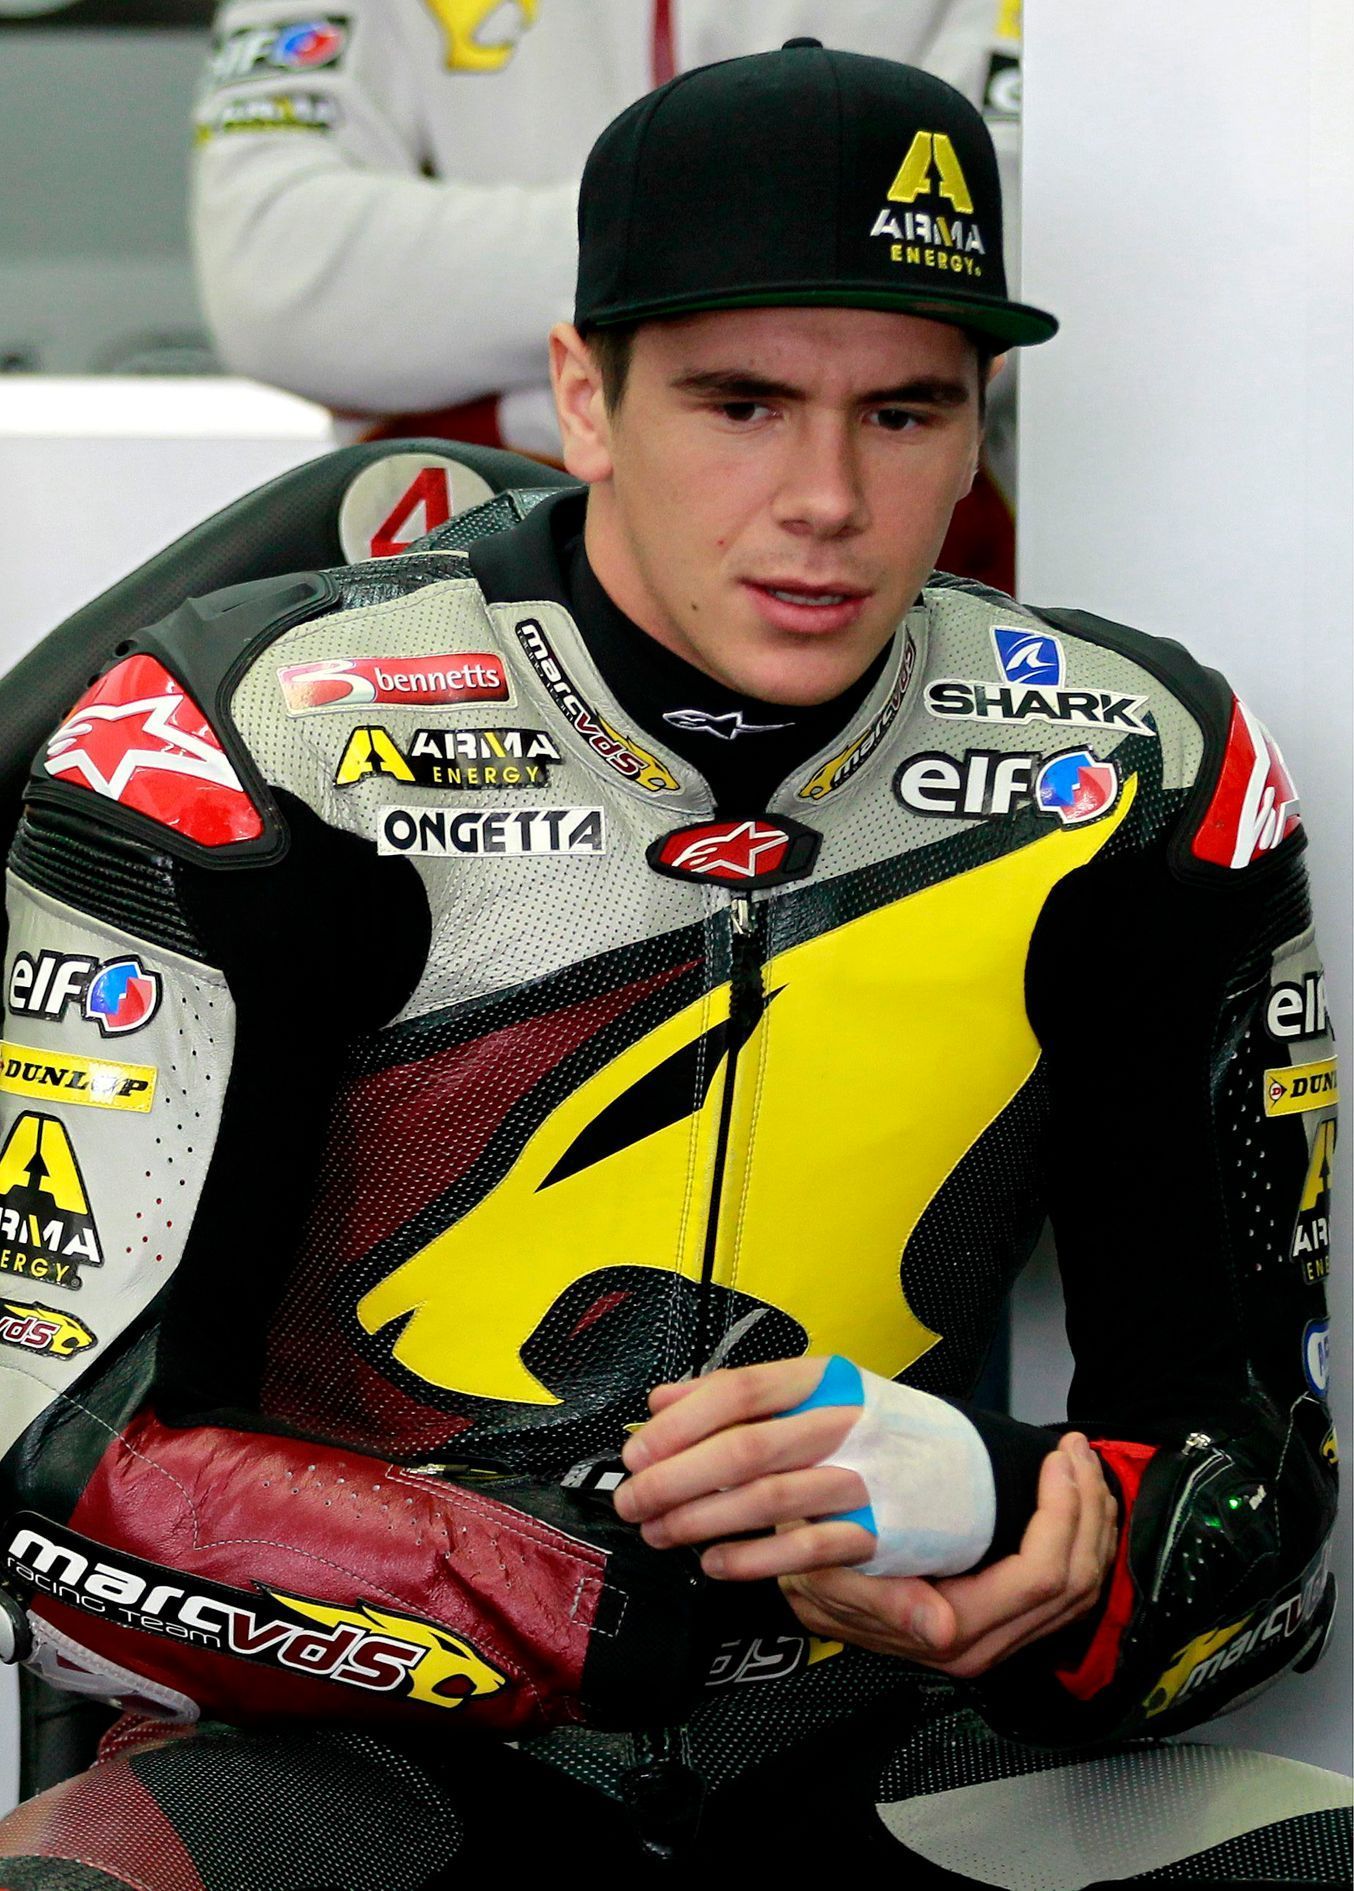 Kalex Moto 2 rider Scott Redding of Britain prepares for the third free practice session ahead of the Valencia Motorcycle Grand Prix at the Ricardo Tormo racetrack in Cheste, near Valencia